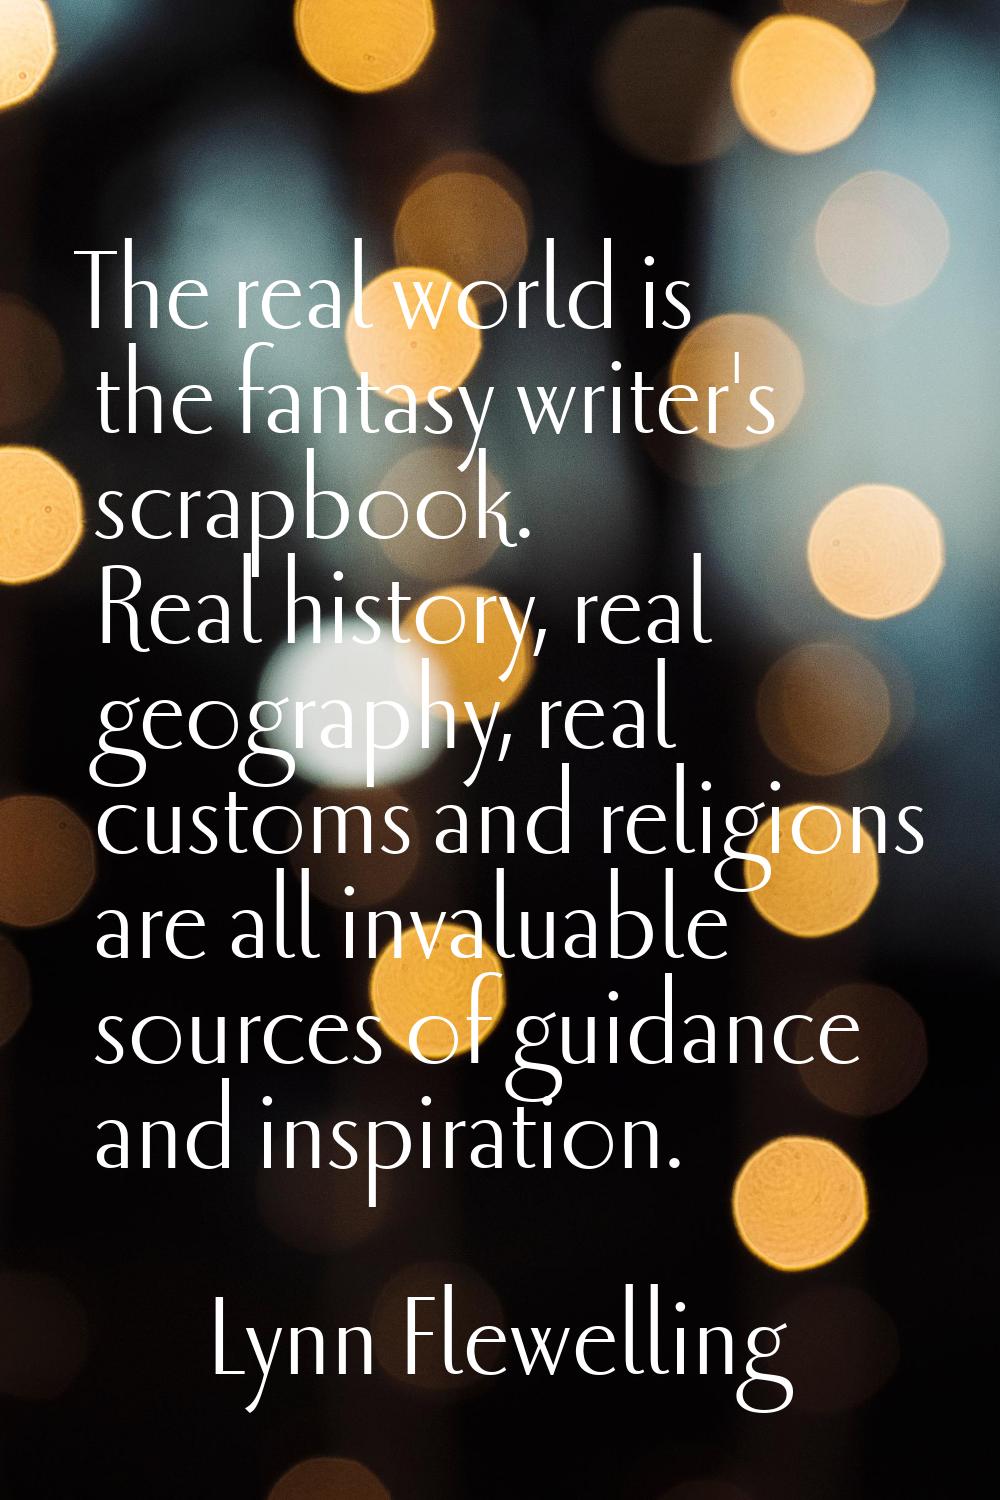 The real world is the fantasy writer's scrapbook. Real history, real geography, real customs and re